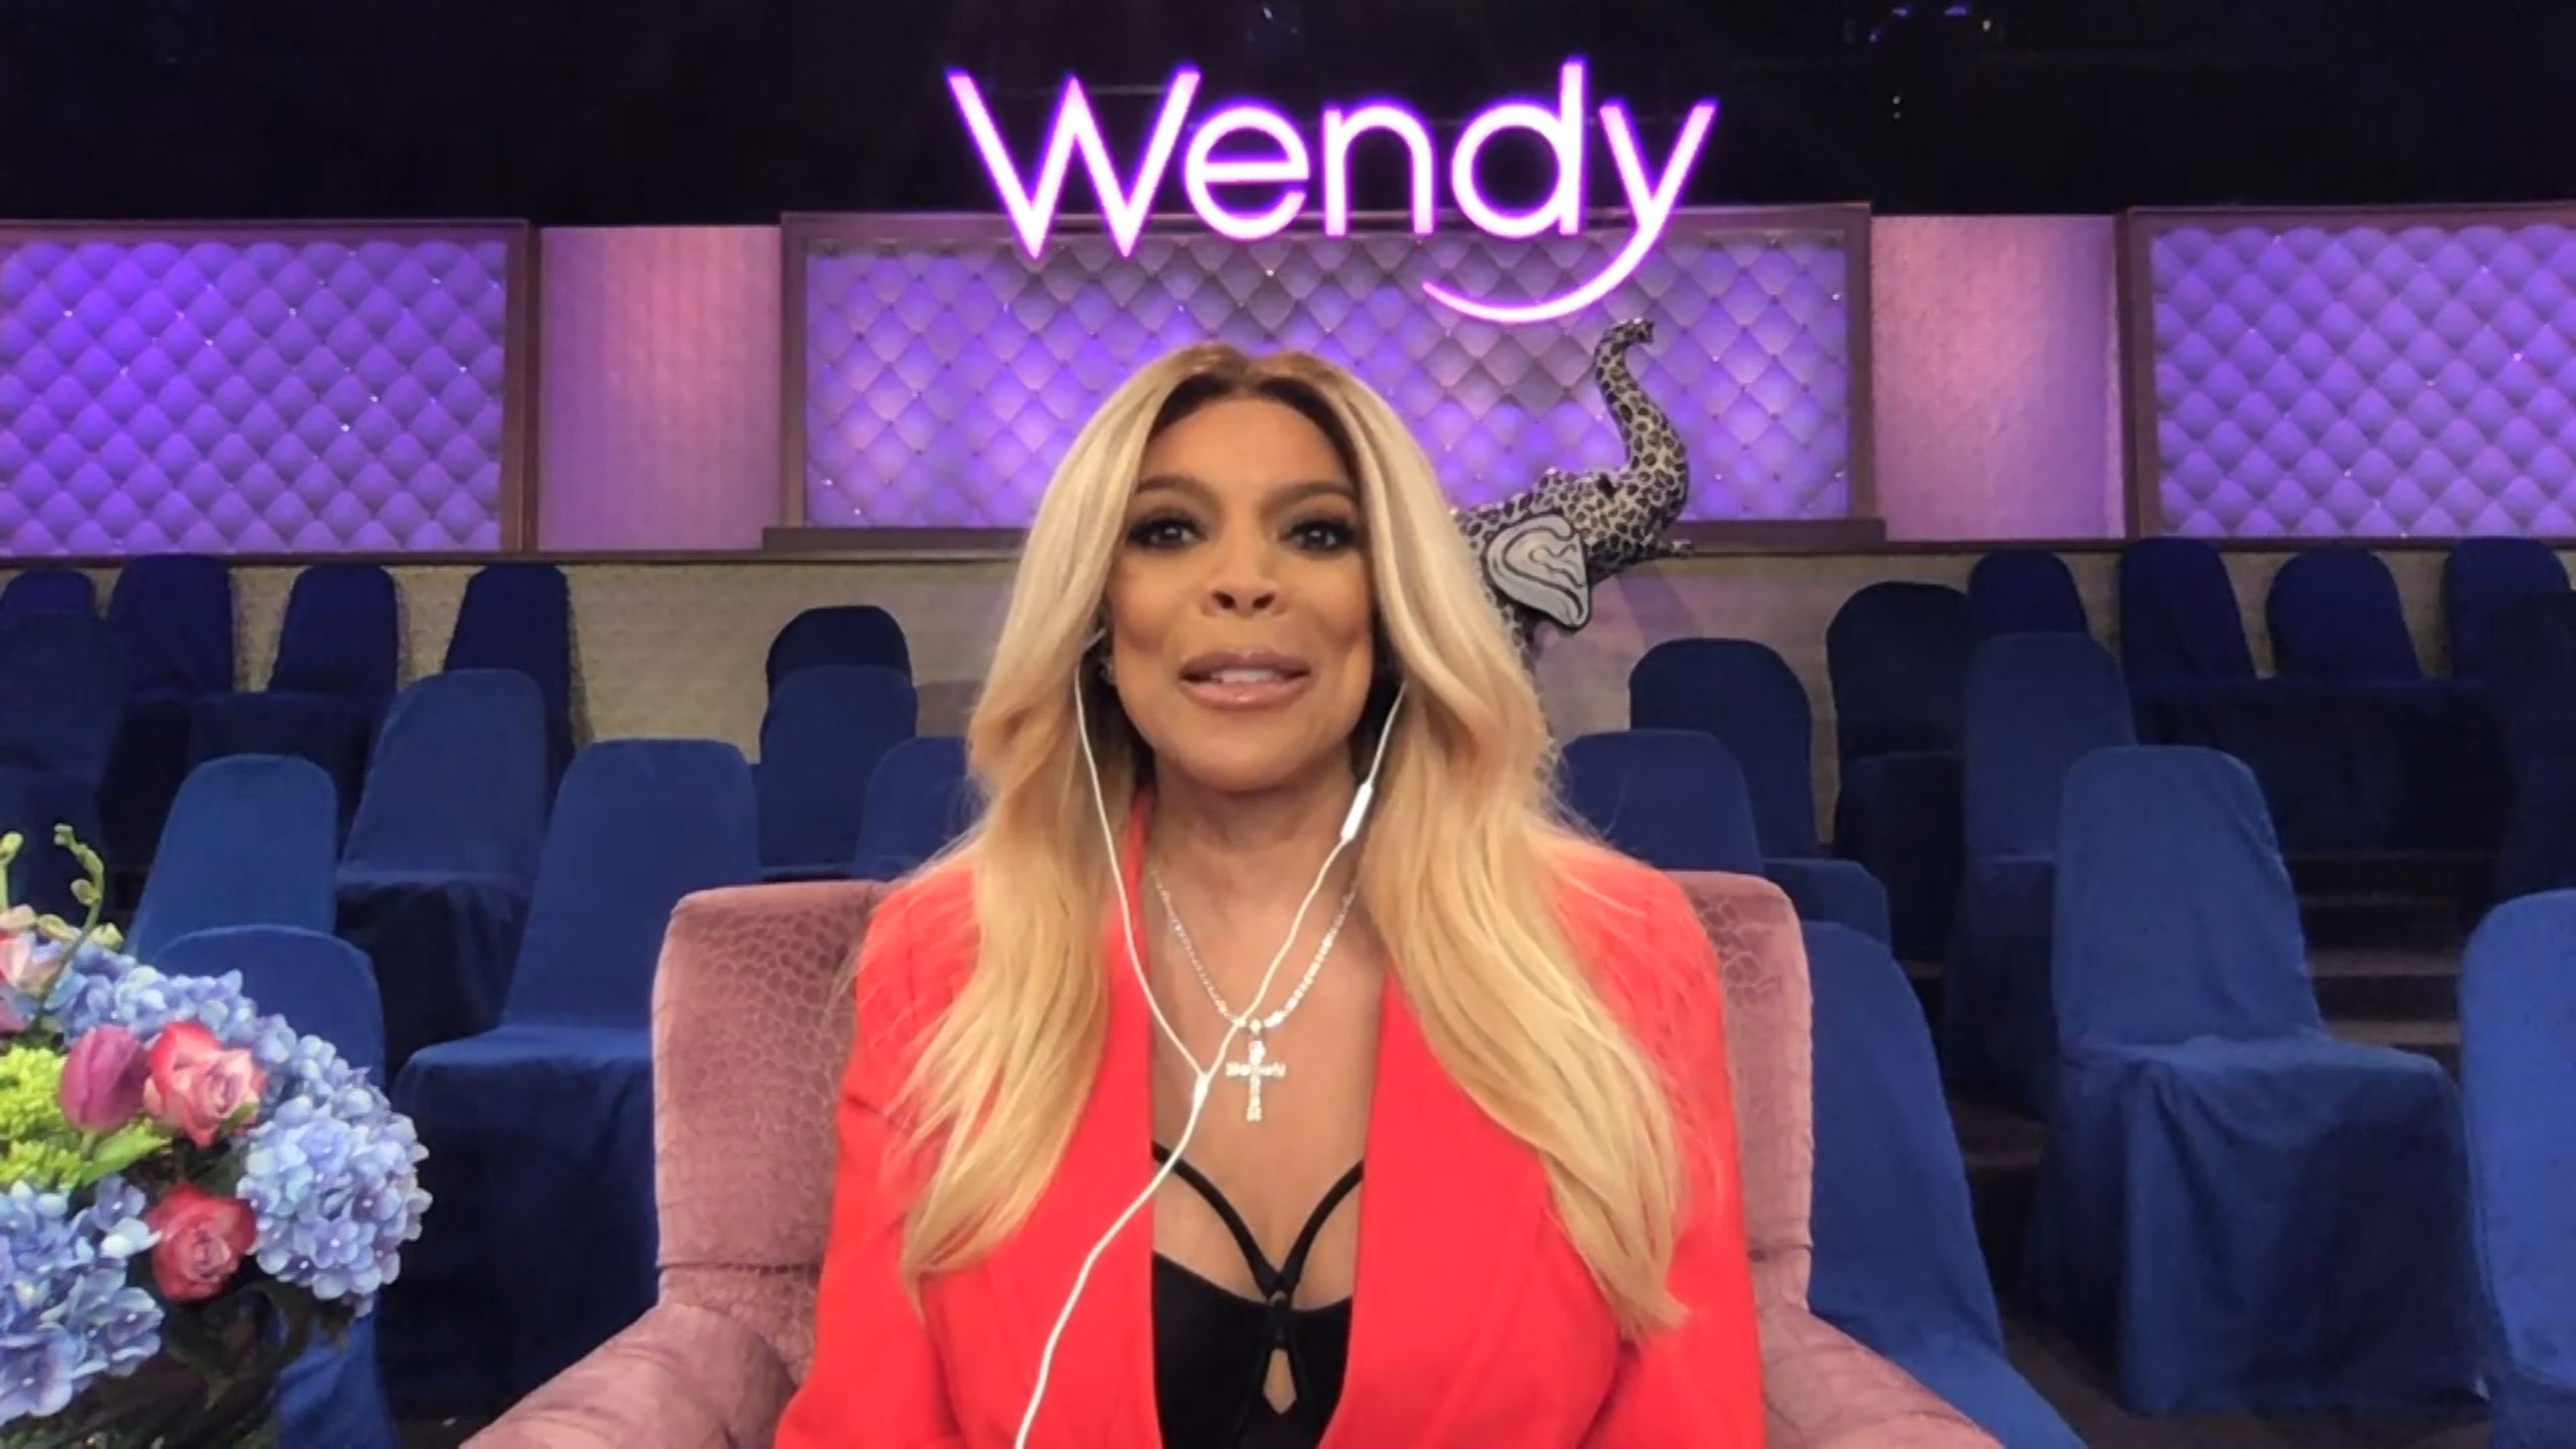 The last episode of The Wendy Williams Show aired in 2022